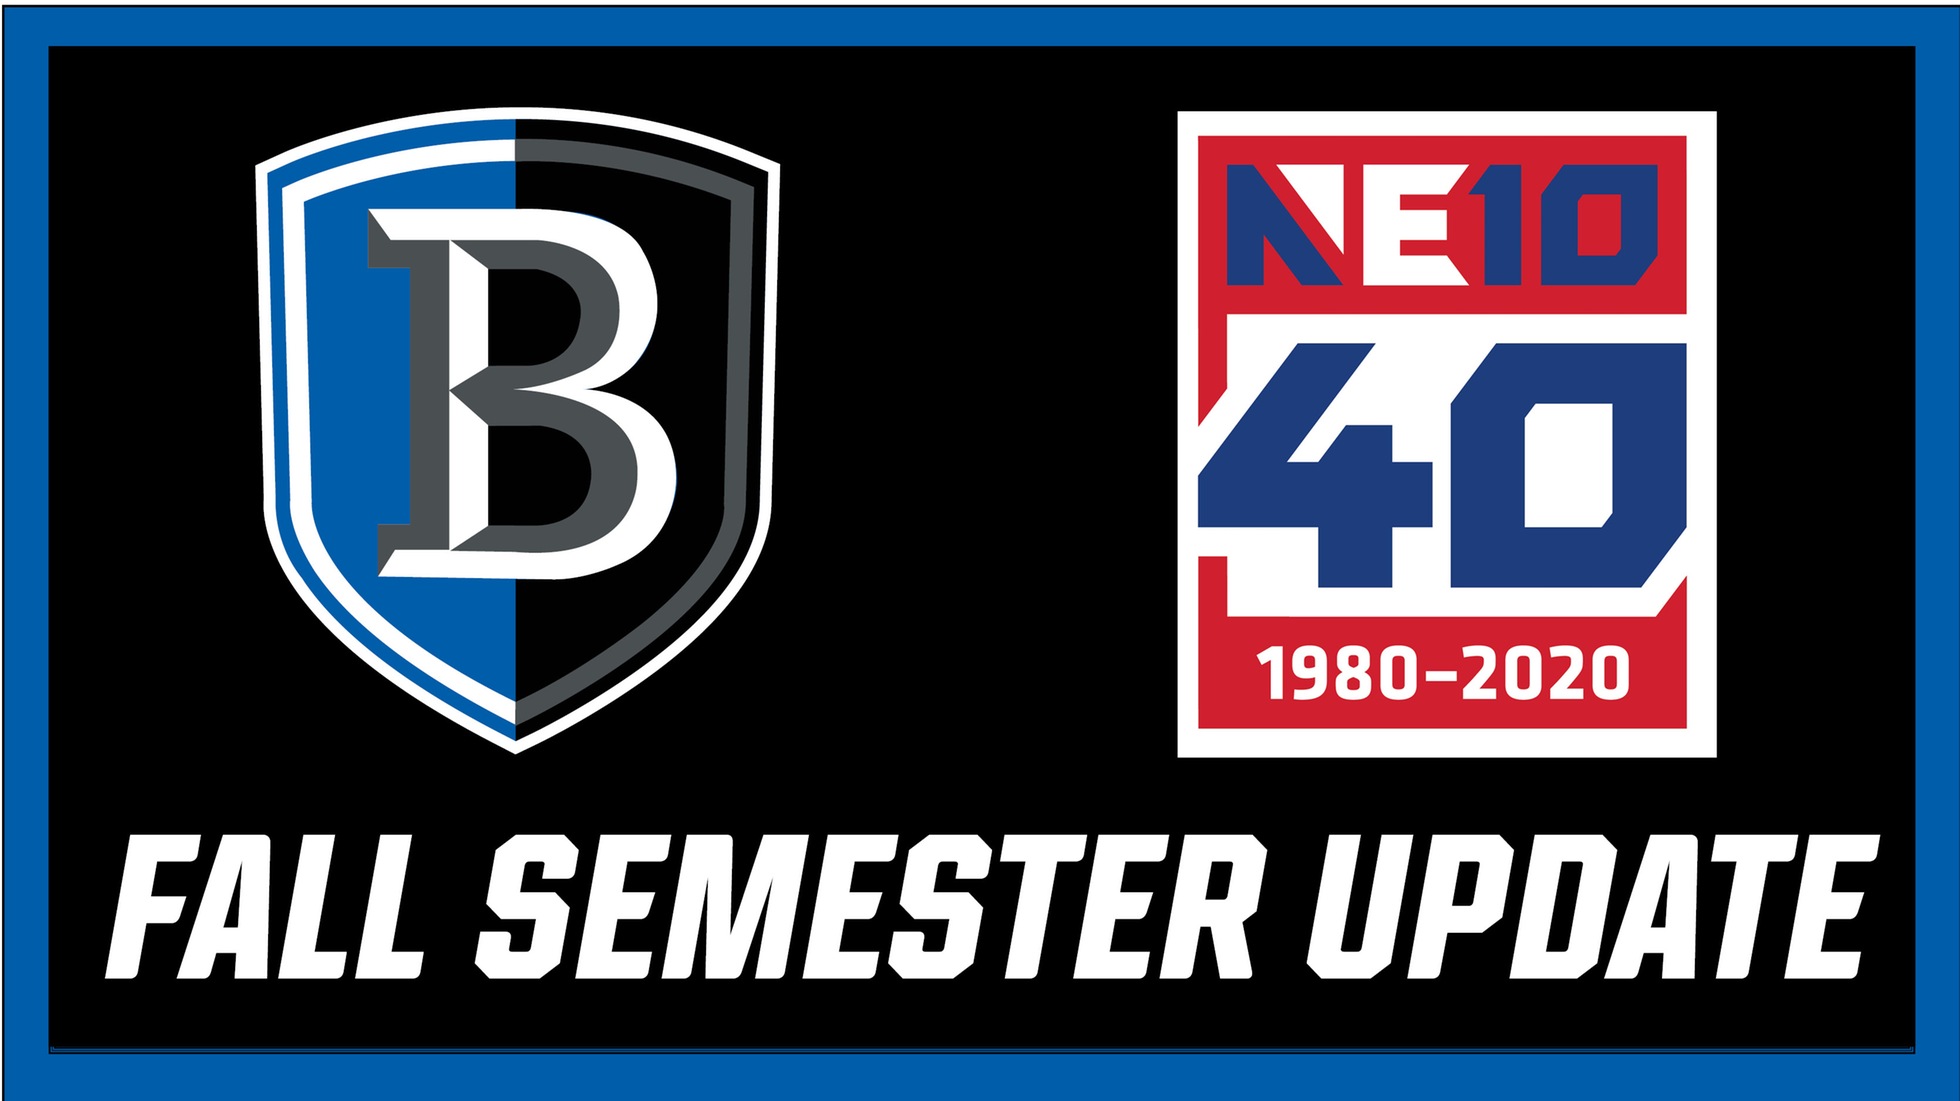 NE10 Suspends Conference-Sponsored Competition For Fall Semester